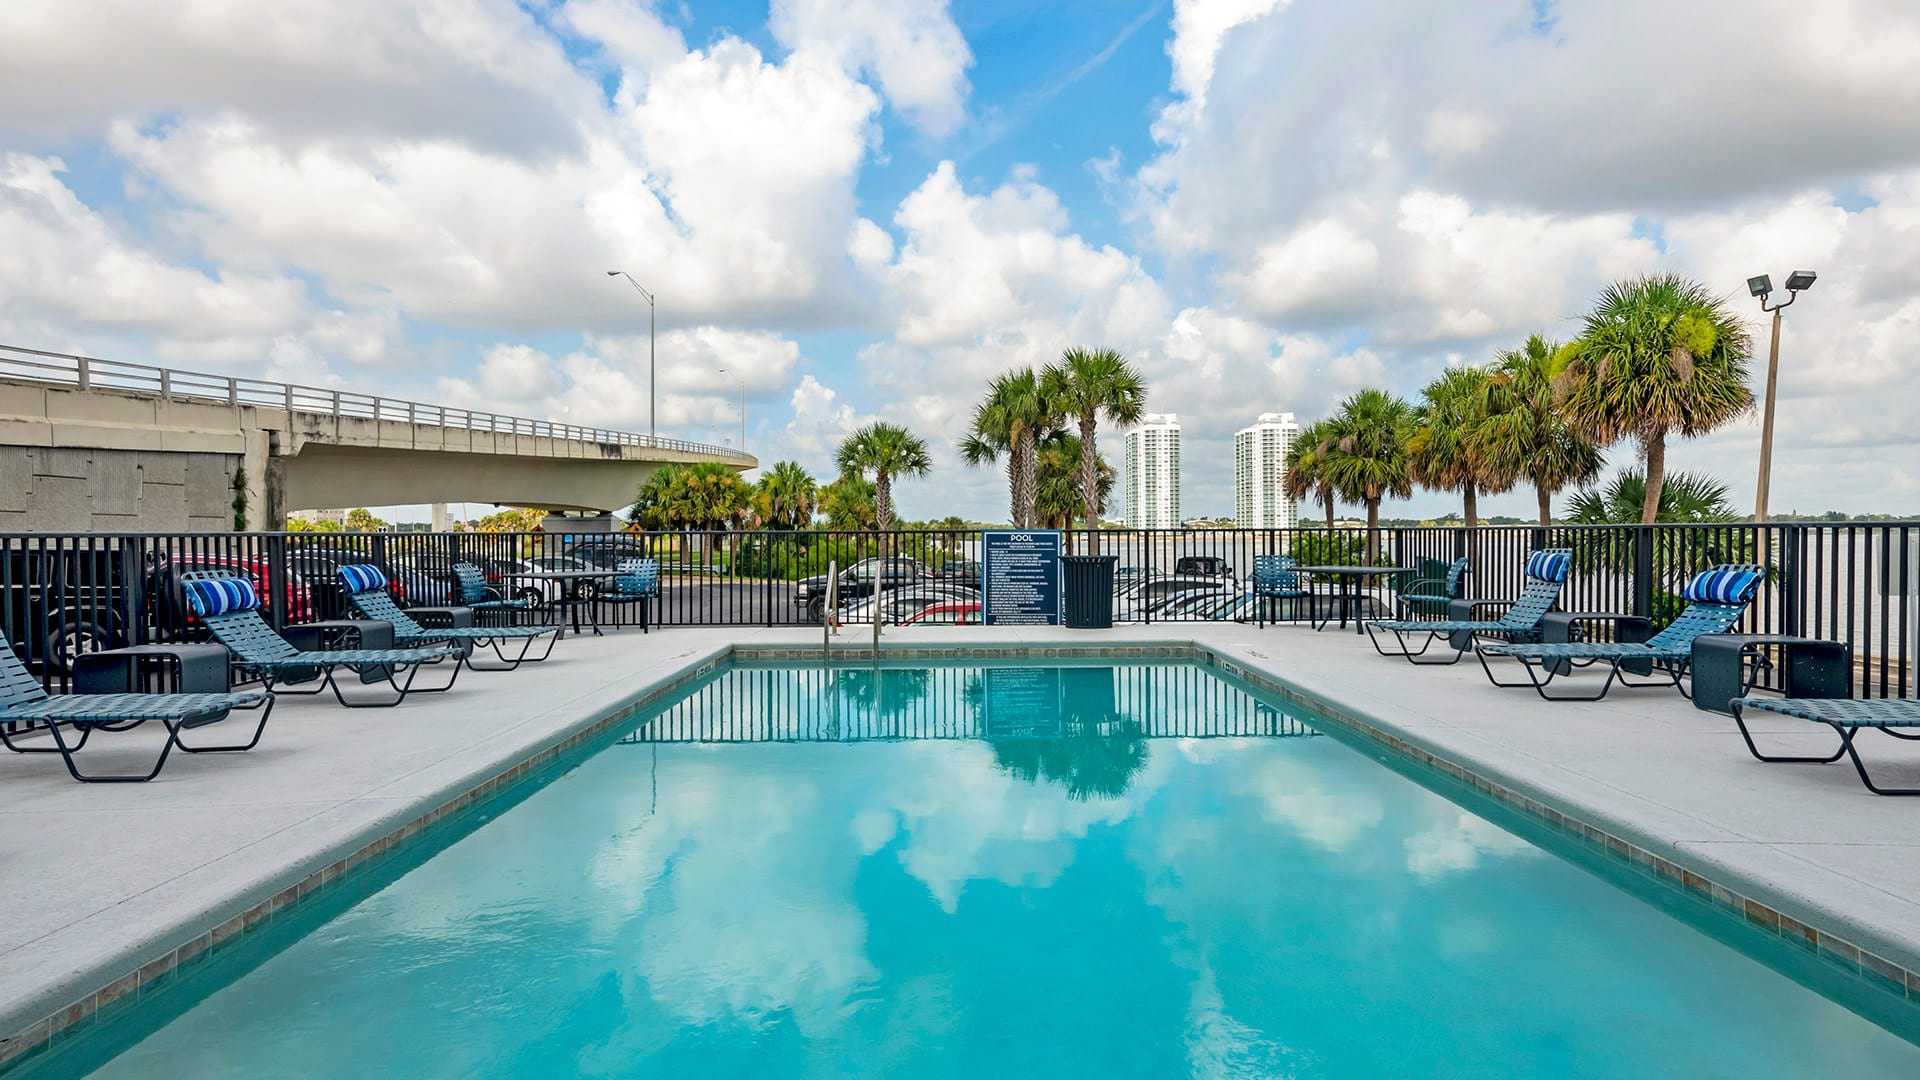 Swimming Pool with Lounge Chairs at Our Daytona Beach Apartment Community